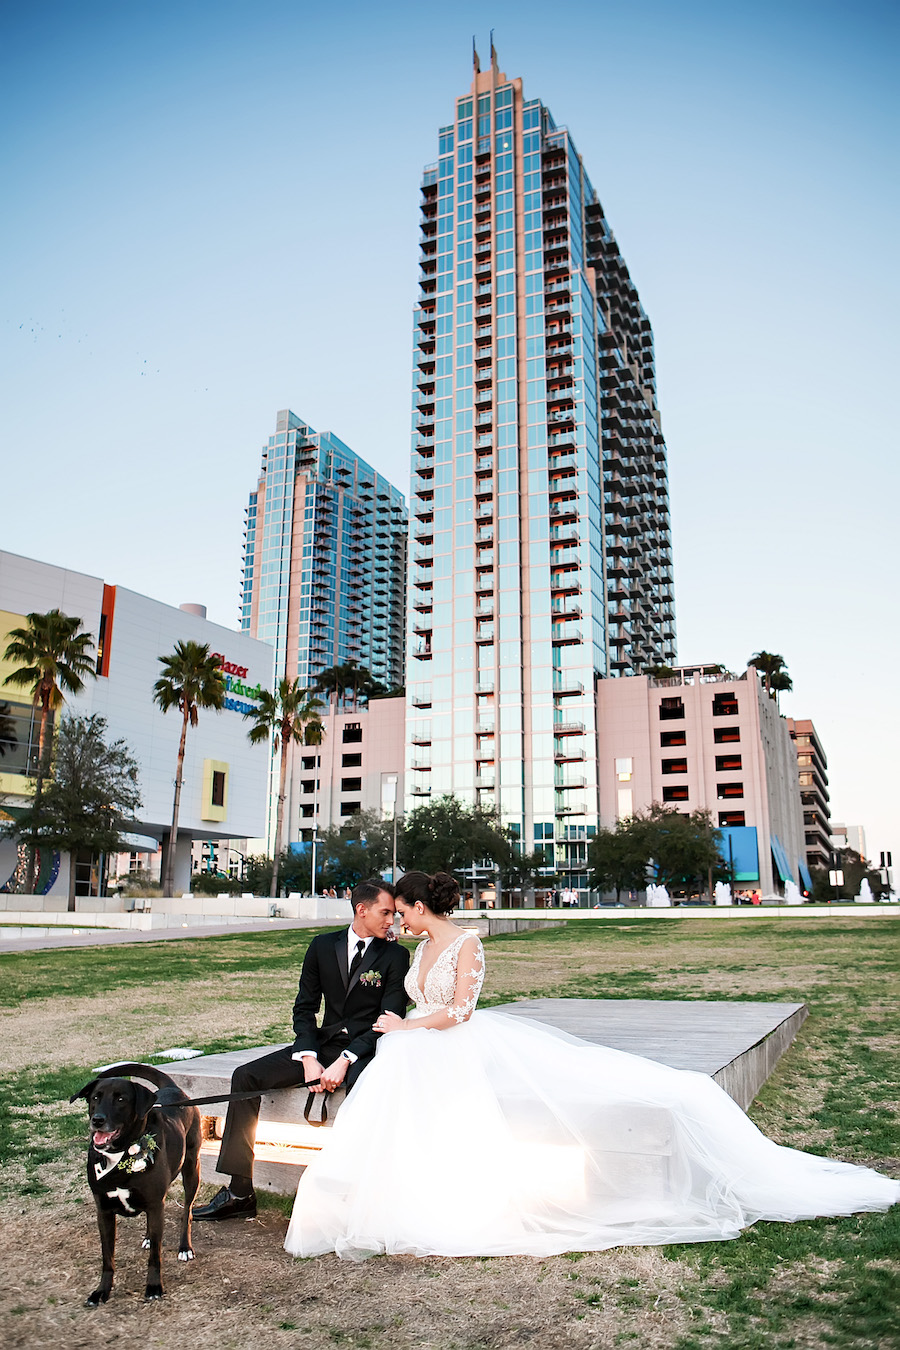 Bride and Groom Downtown Tampa Wedding Portrait with Dog in Tuxedo with Floral Collar | Tampa Bay Wedding Pet Planner Fairytail Pet Care | Wedding Photographer Limelight Photography